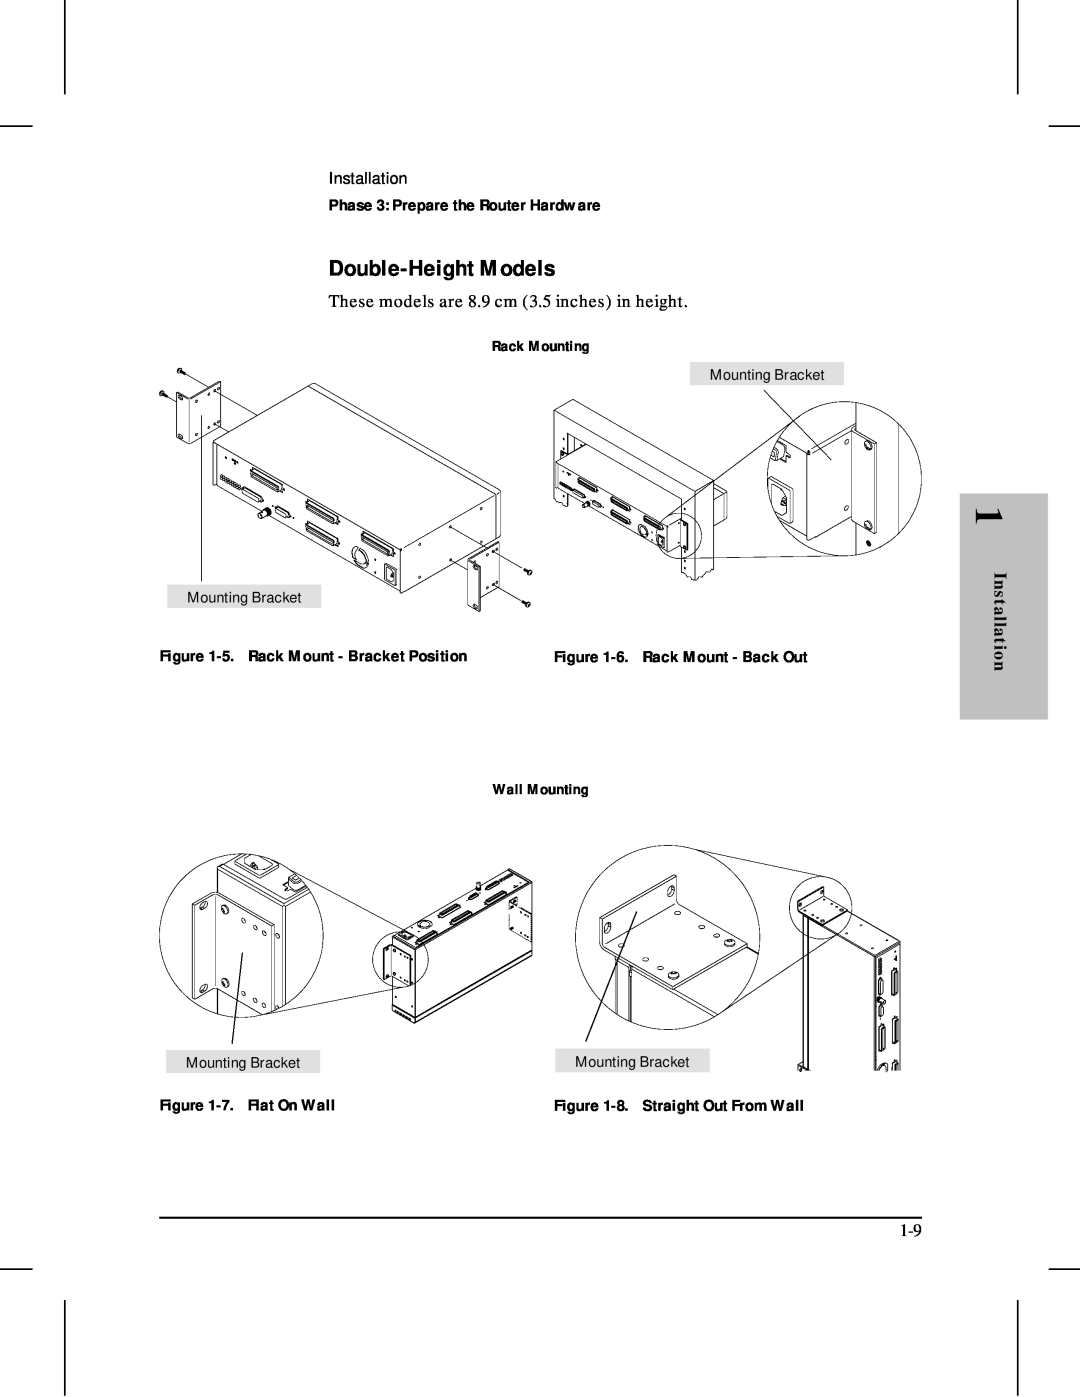 HP 480 manual Double-Height Models, Installation, Phase 3 Prepare the Router Hardware, 5. Rack Mount - Bracket Position 